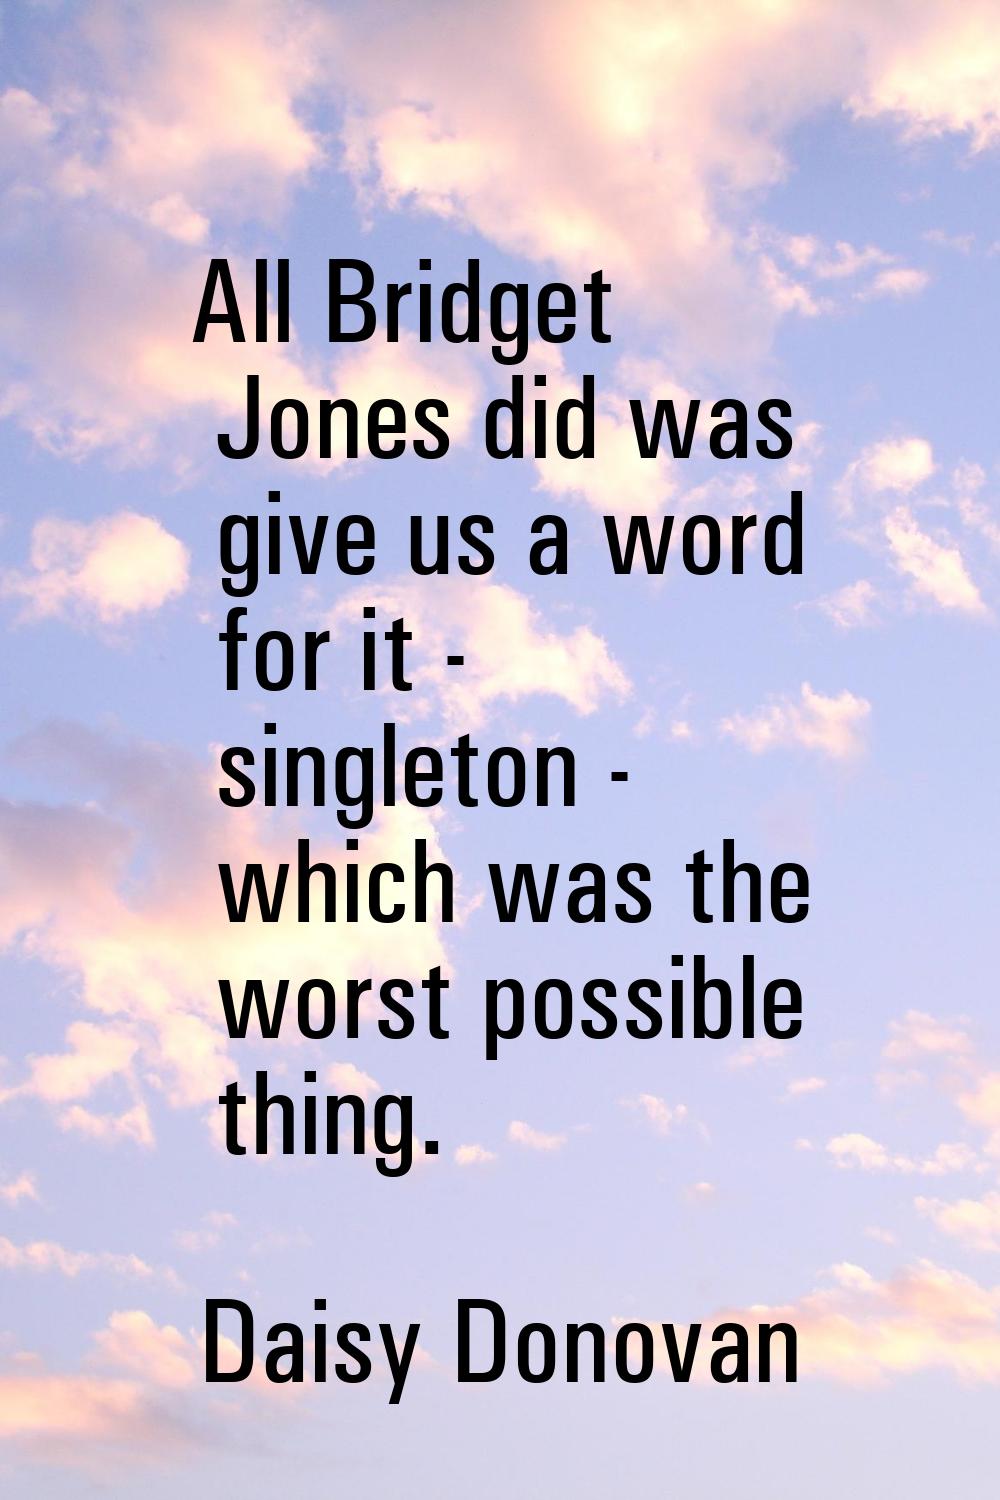 All Bridget Jones did was give us a word for it - singleton - which was the worst possible thing.